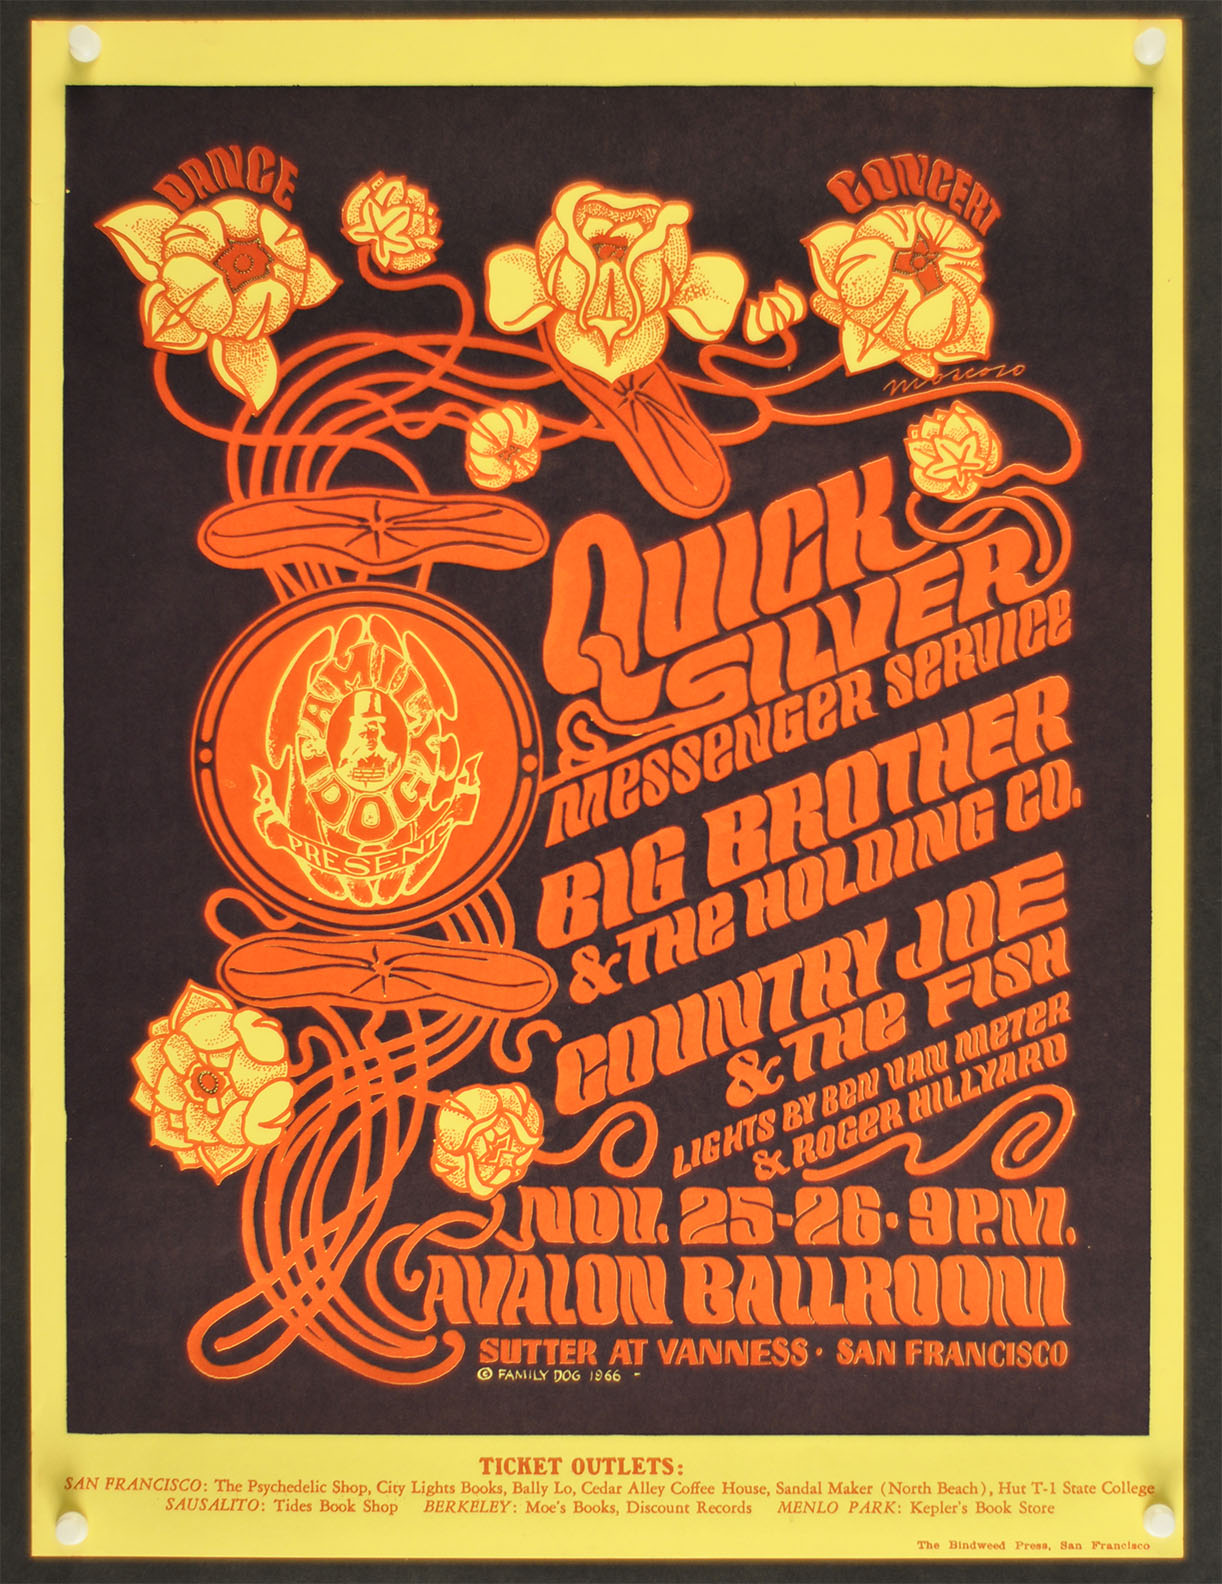 Quicksilver Messenger Service, Big Brother & the Holding Company 